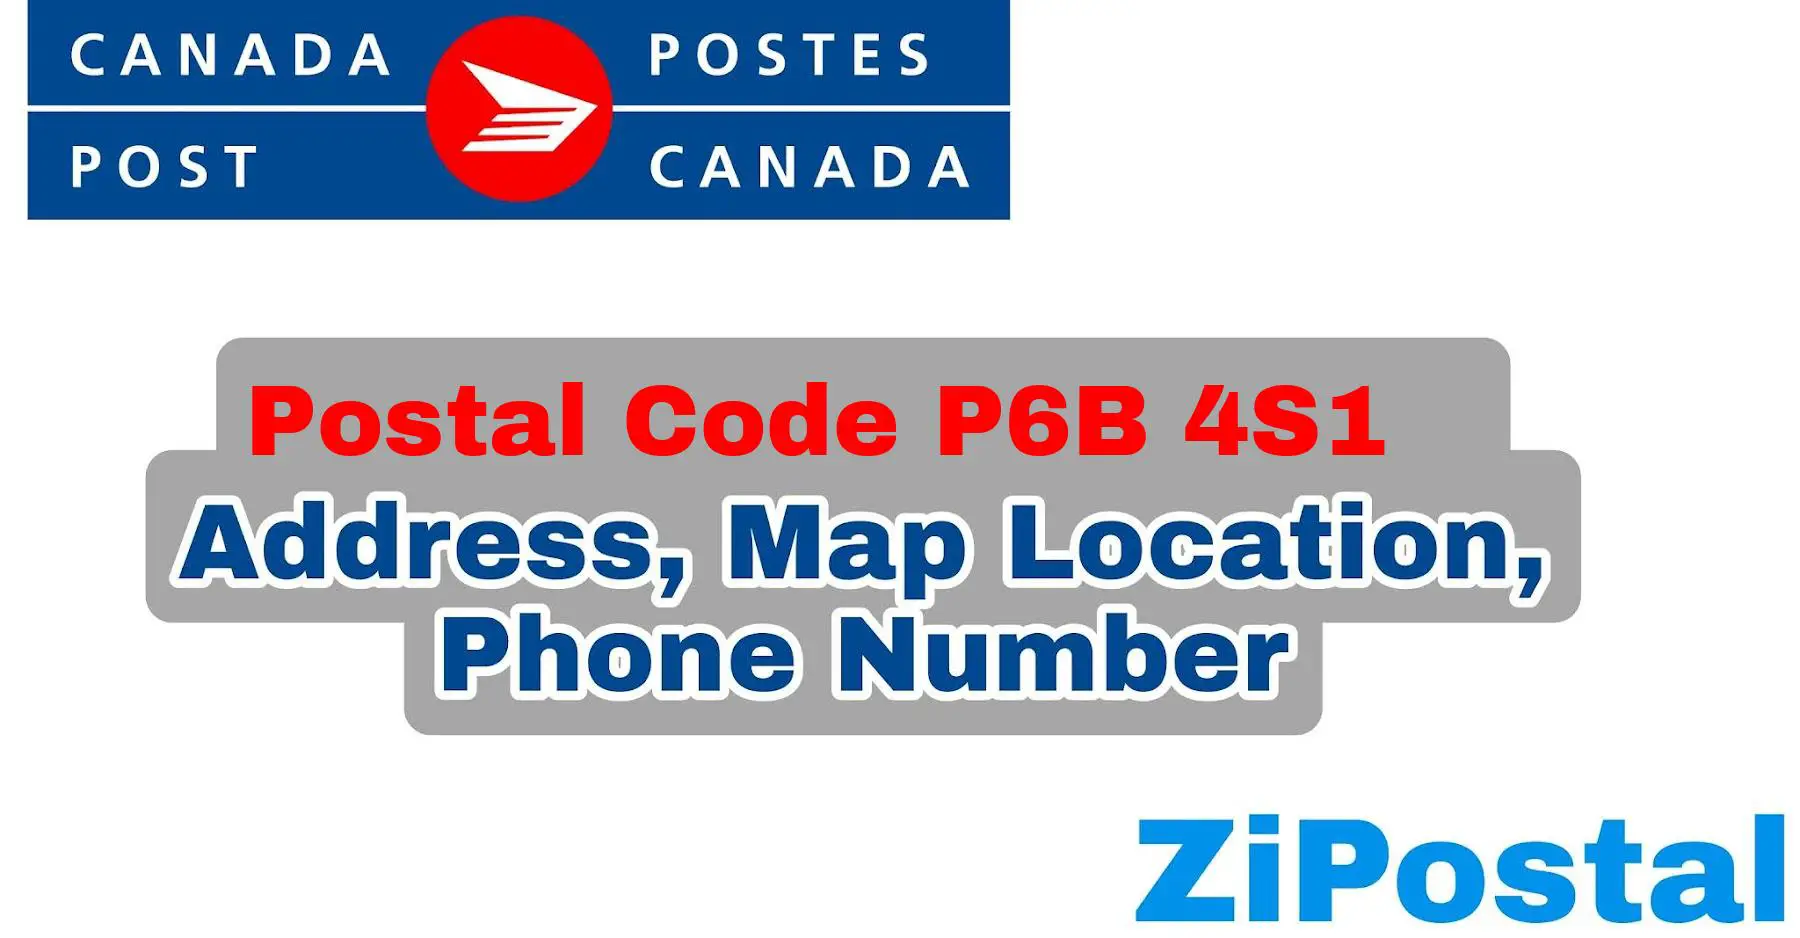 Postal Code P6B 4S1 Address Map Location and Phone Number